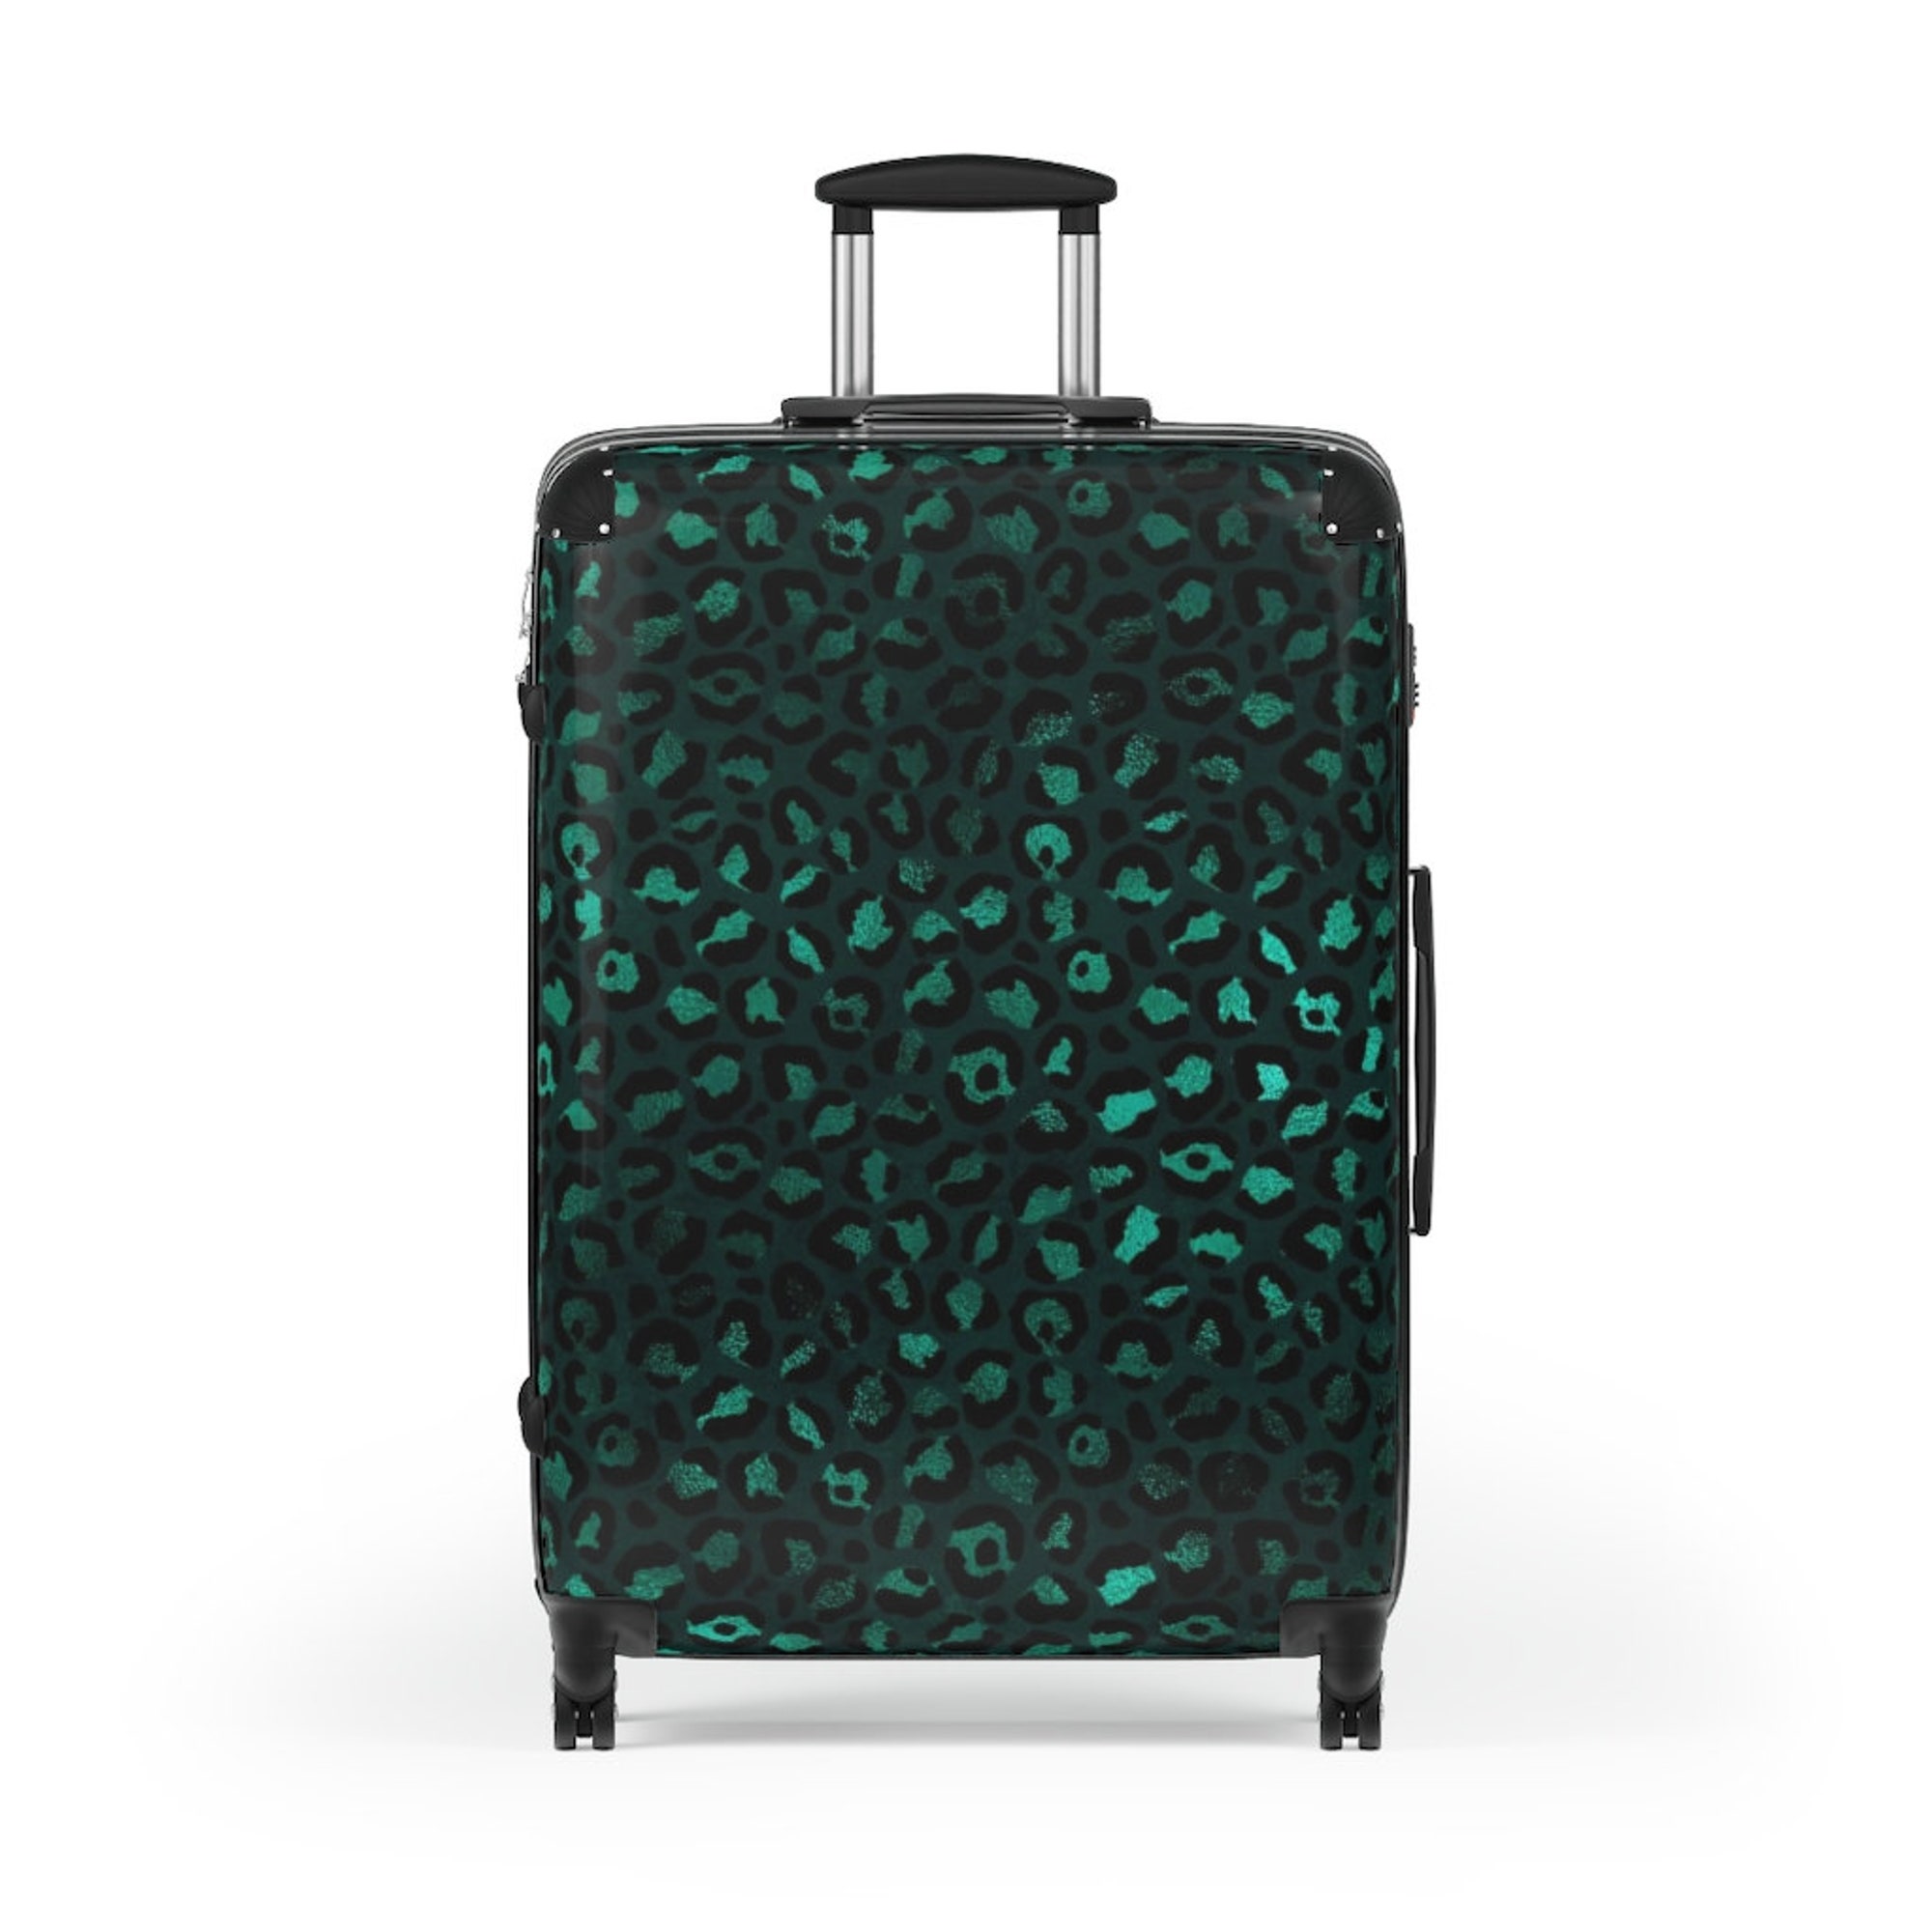 Discover The Deep Jungle Suitcase